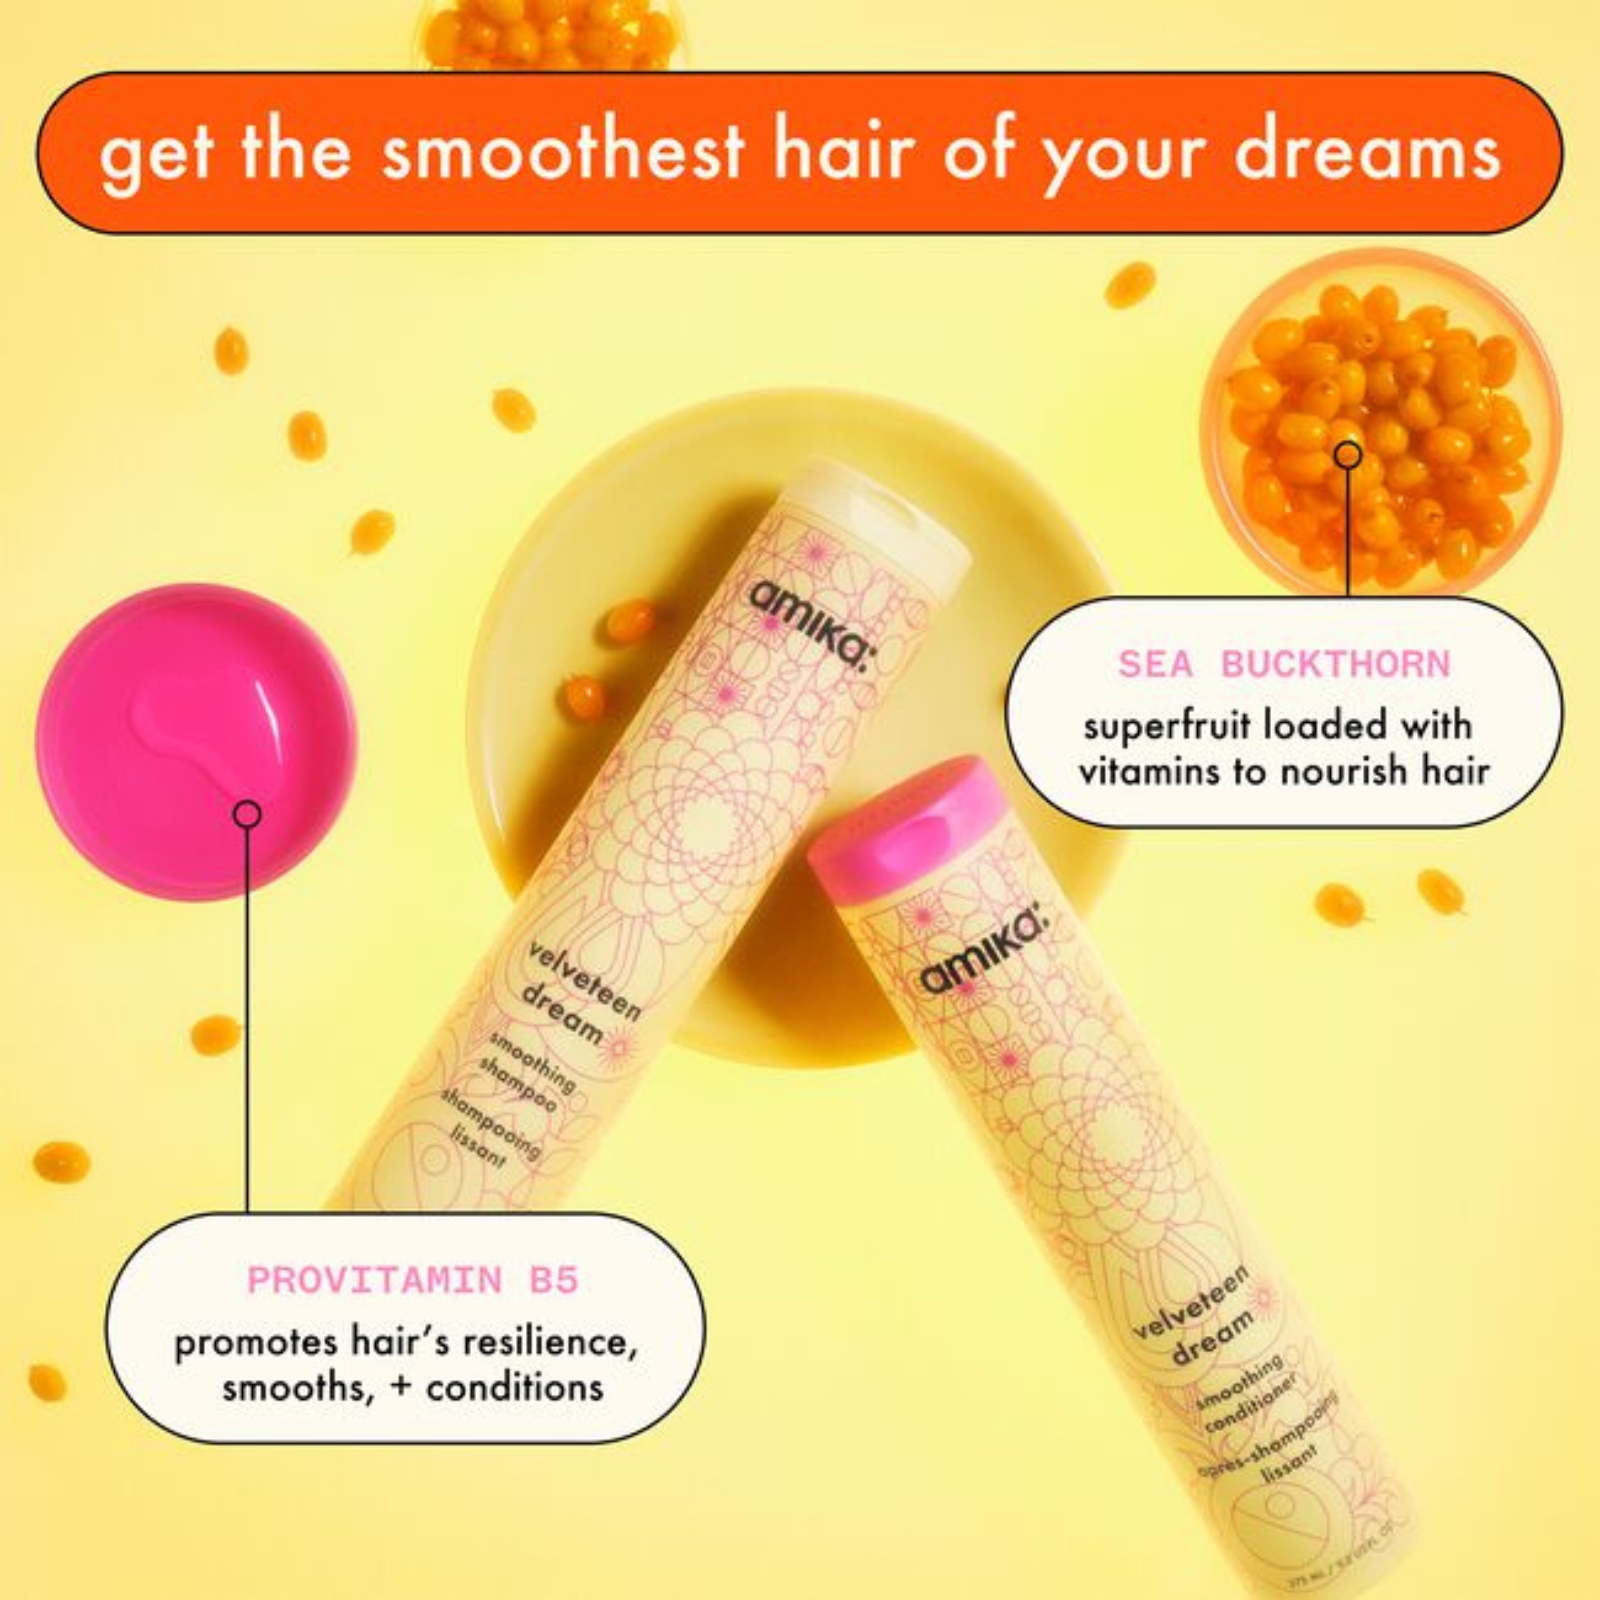 For the smoothest hair of your dreams. Condition your way to your silkiest mane yet. Preps dry, unmanageable hair: great for preparing frizz-prone strands for styling. Suitable for chemical treatment + color: feel free to get all the brazilian + keratin treatments and color you desire! Free from sulfates, parabens, phthalates, mineral oil, and petrolatum.